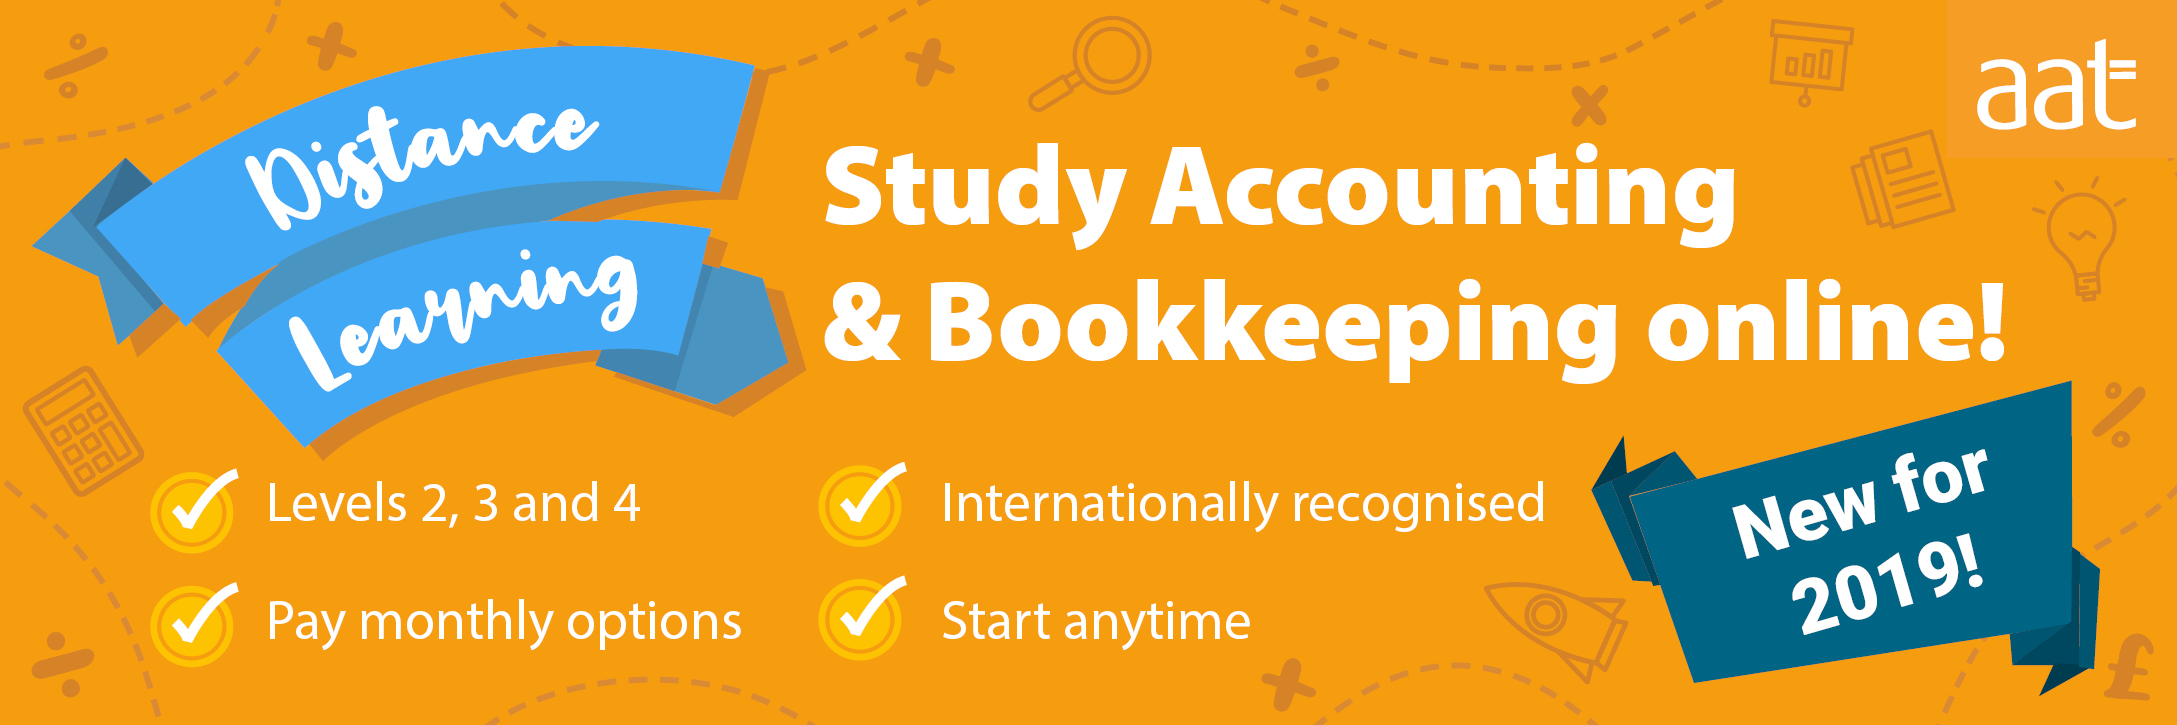 Study AAT online: Begin your career in finance with our flexible, online accounting & bookkeeping courses!